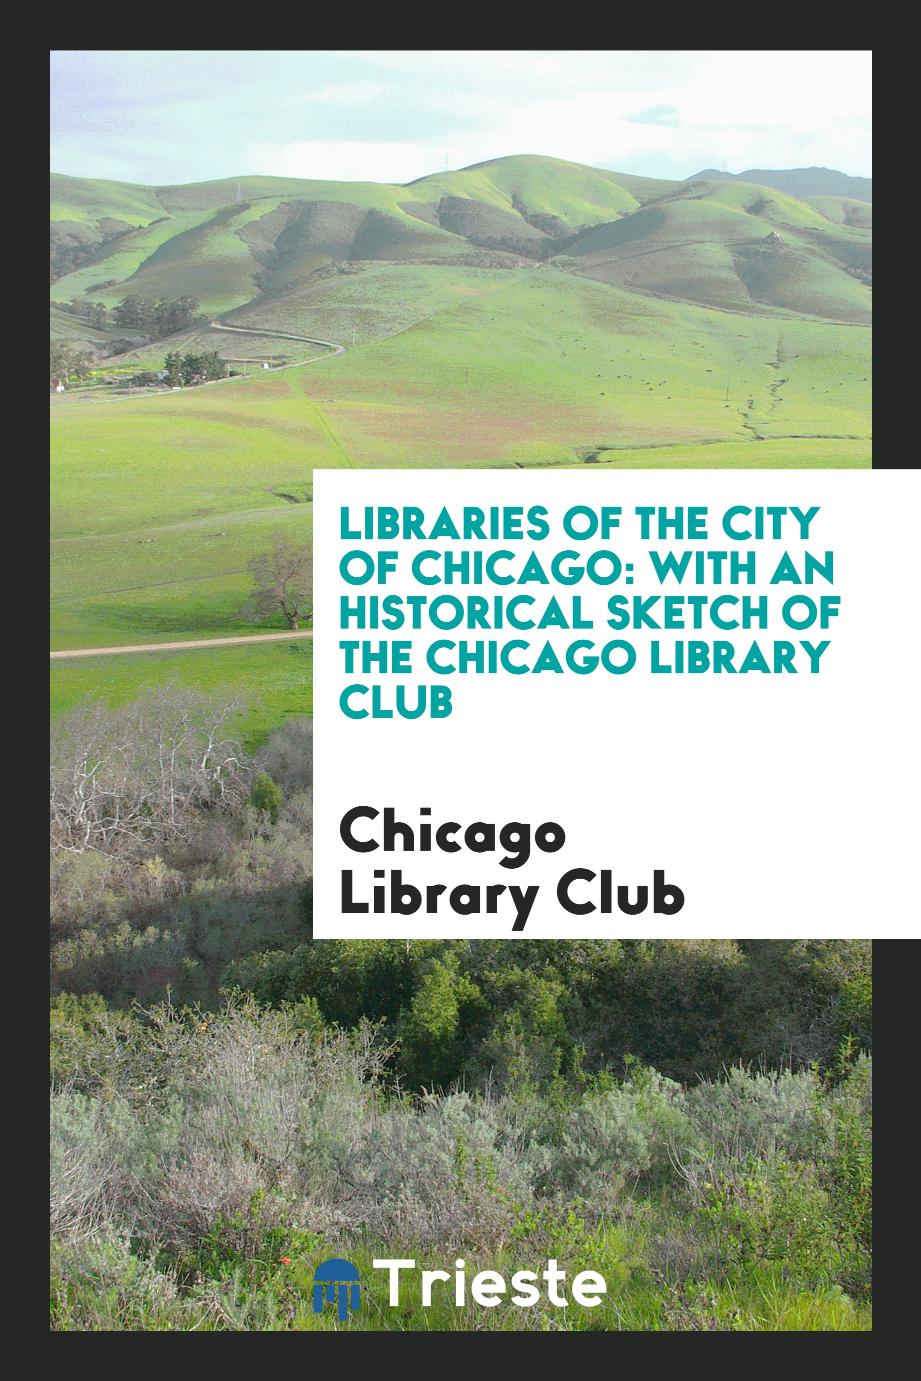 Libraries of the City of Chicago: With an Historical Sketch of the Chicago Library Club